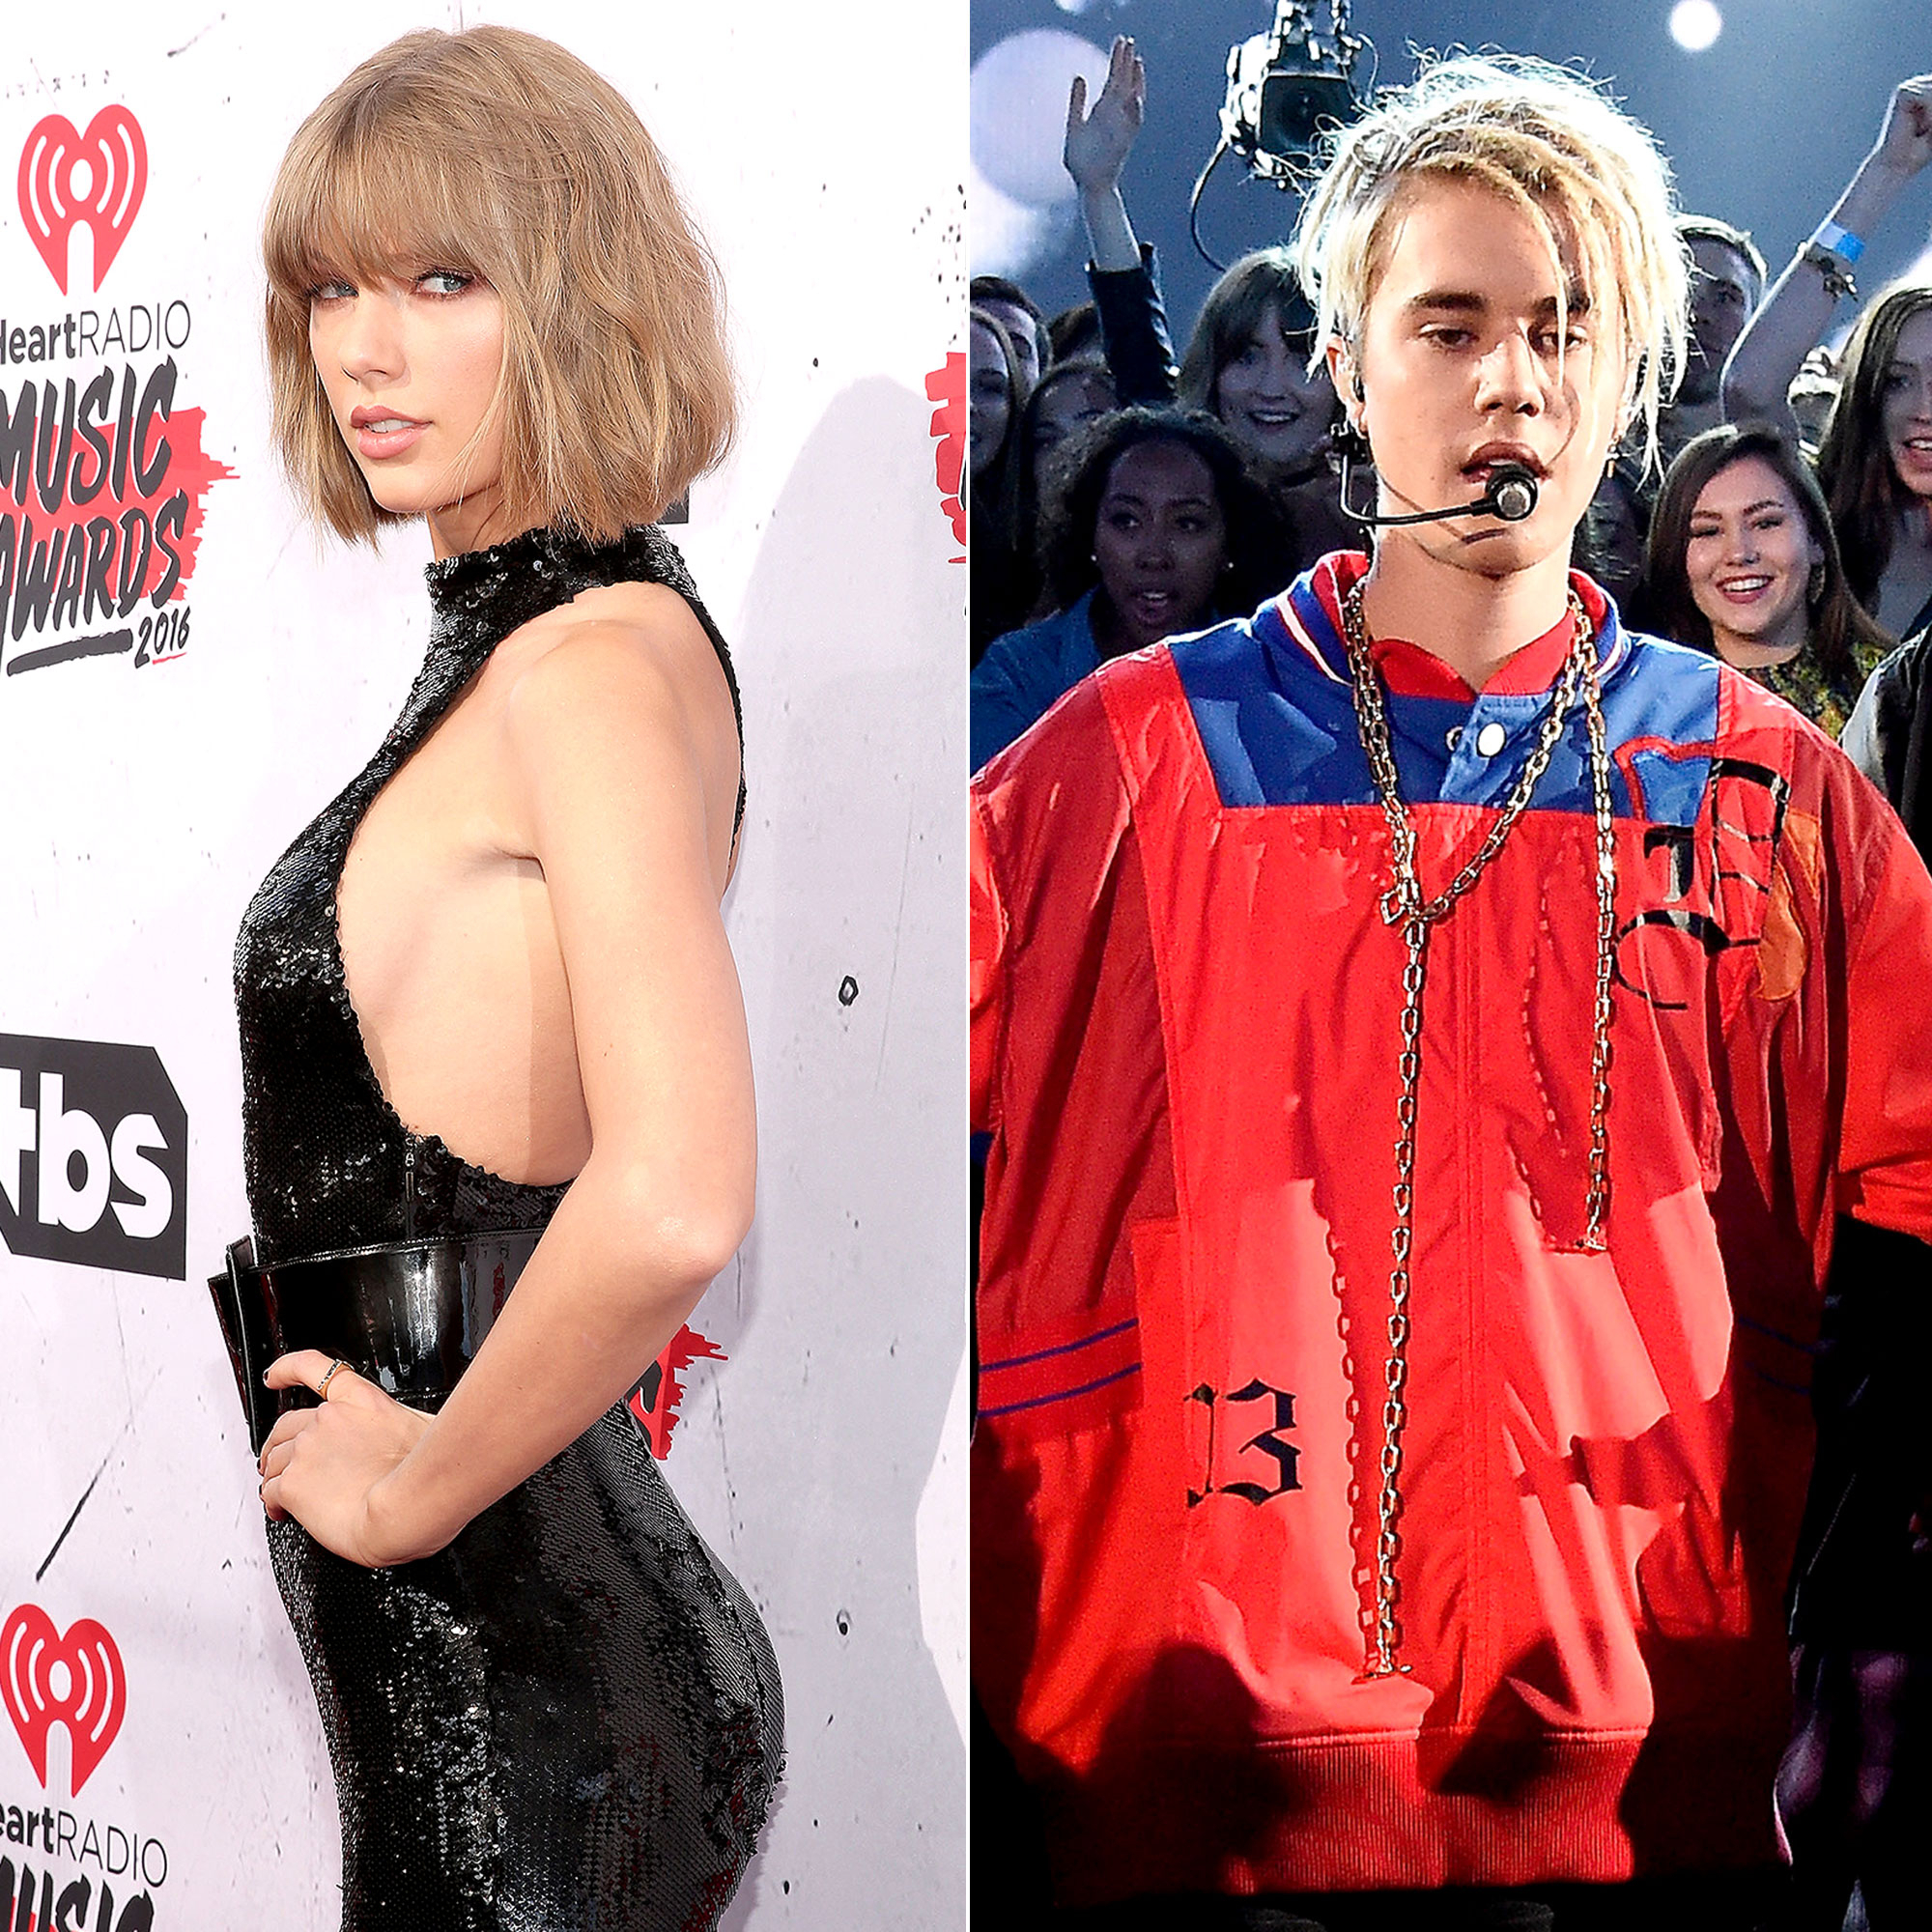 Taylor Swift Reacts to Justin Bieber’s iHeartRadio Performance